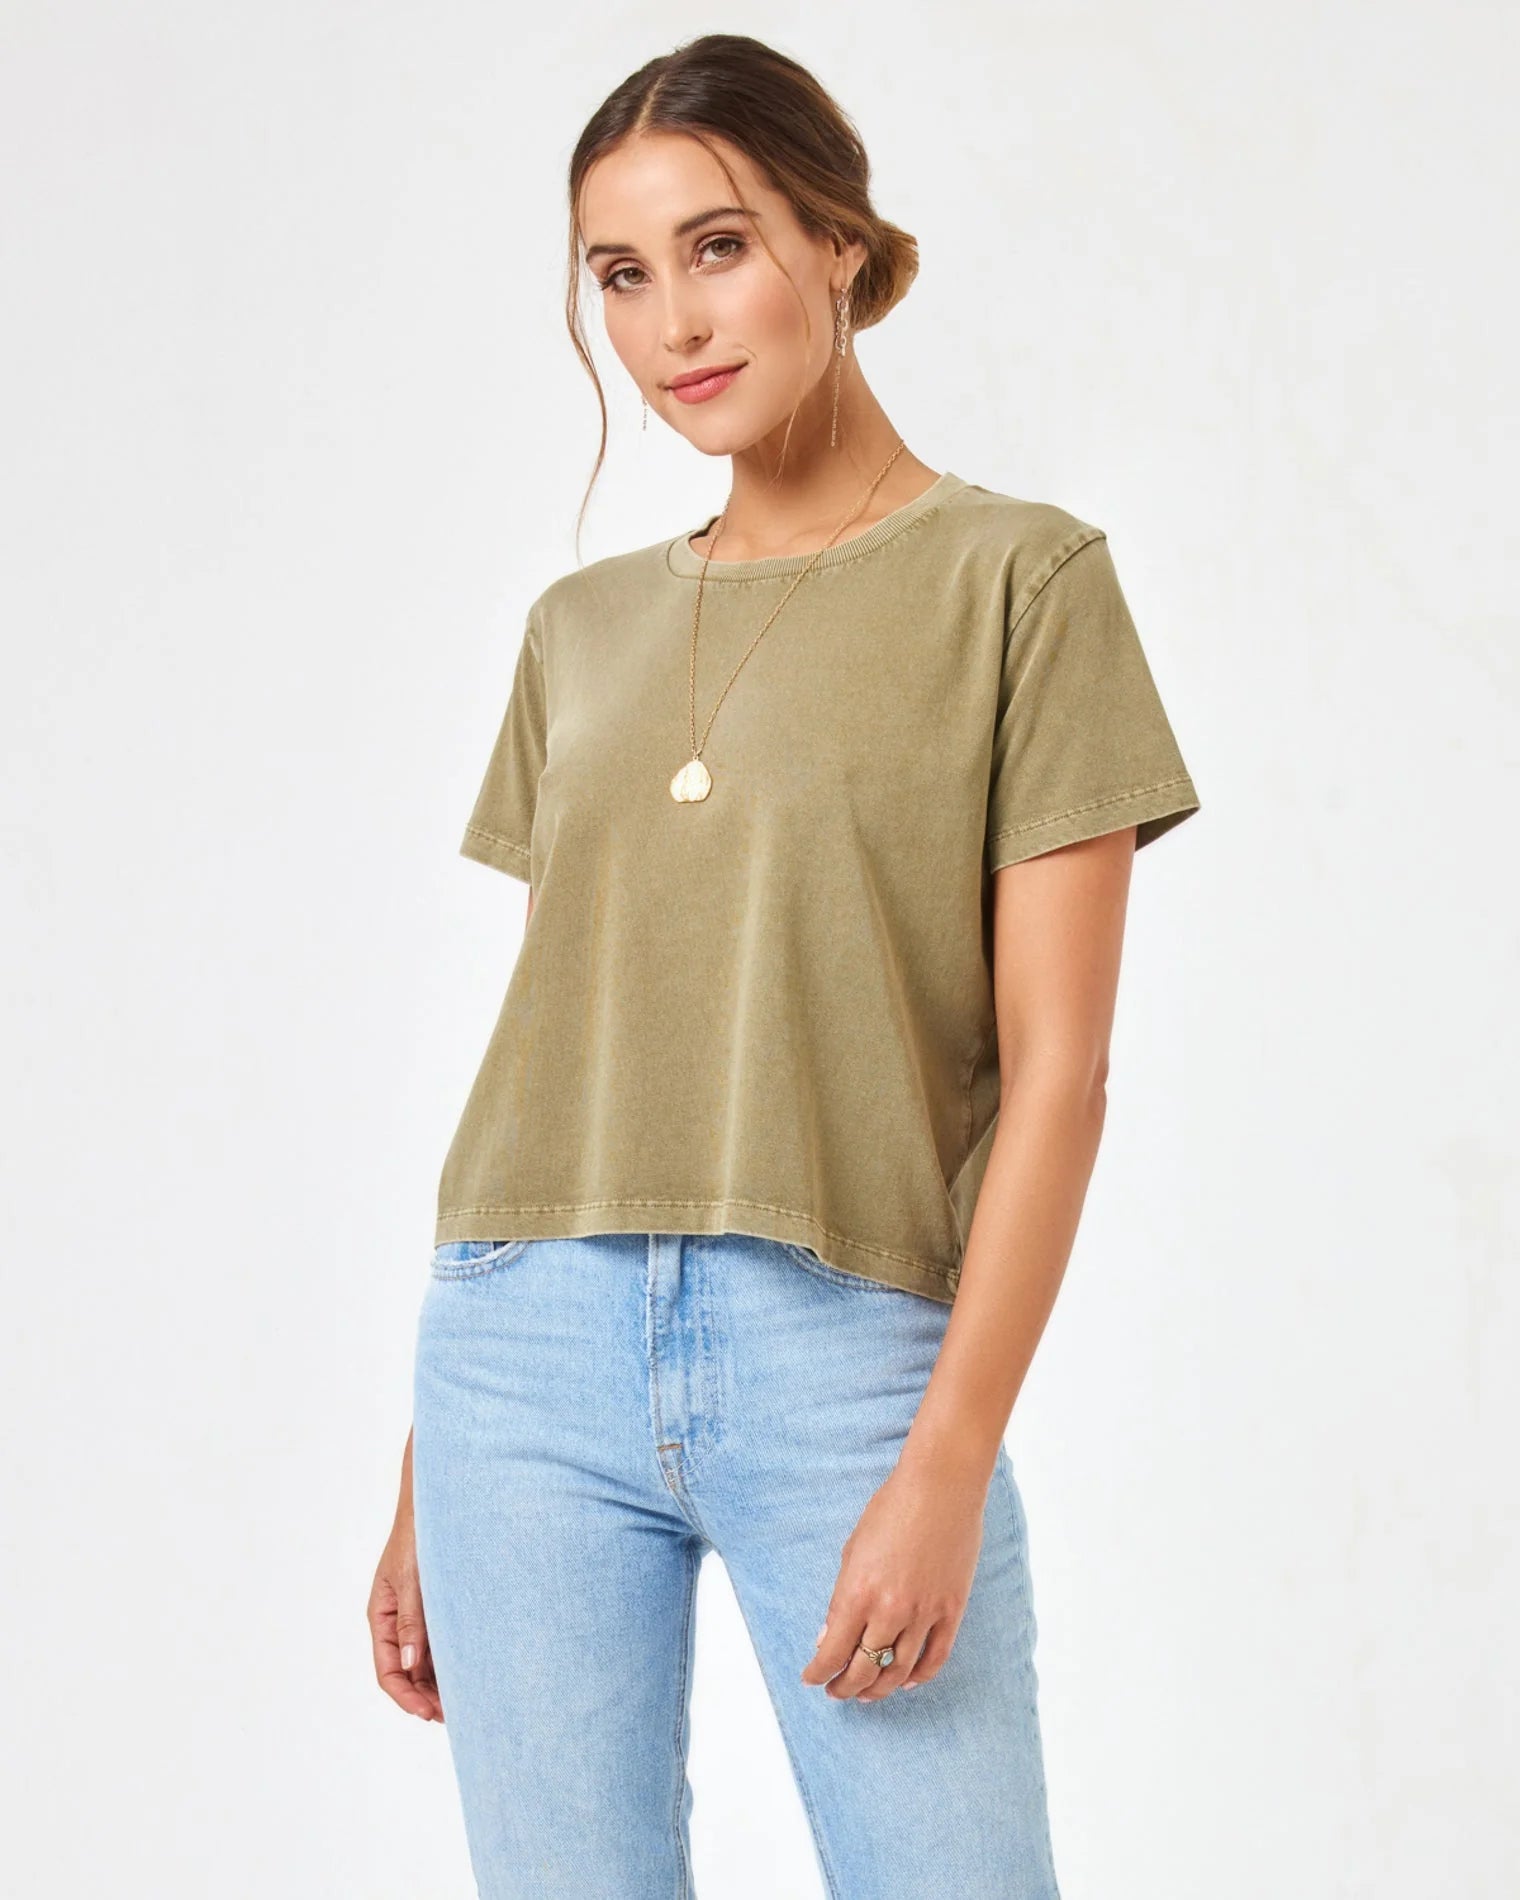 Olive All Day Top